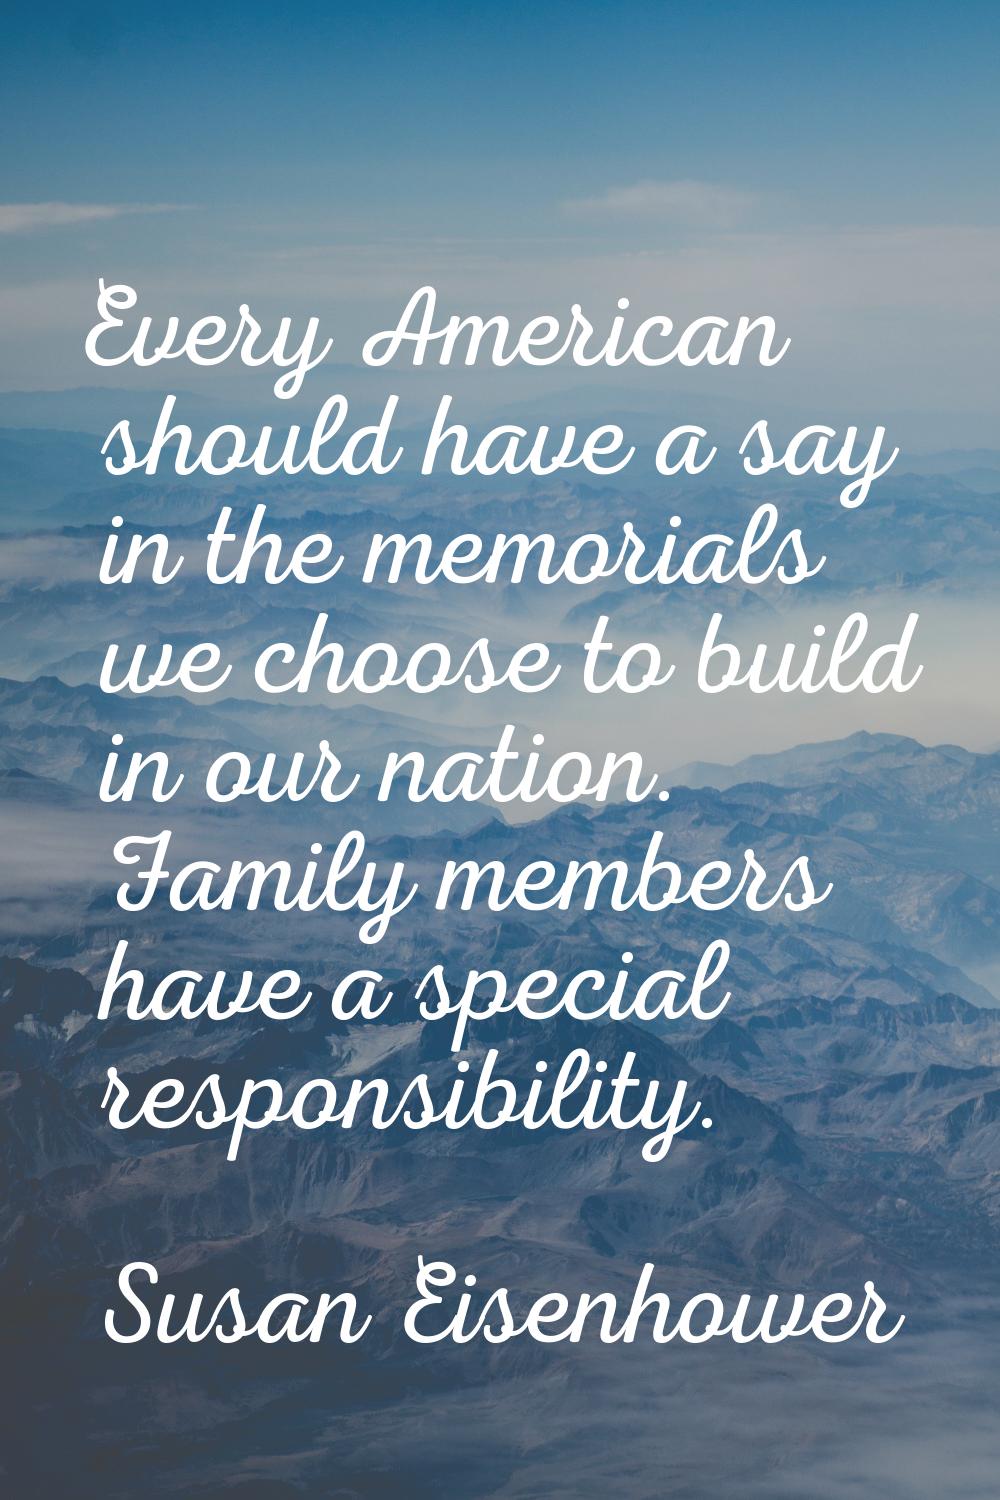 Every American should have a say in the memorials we choose to build in our nation. Family members 